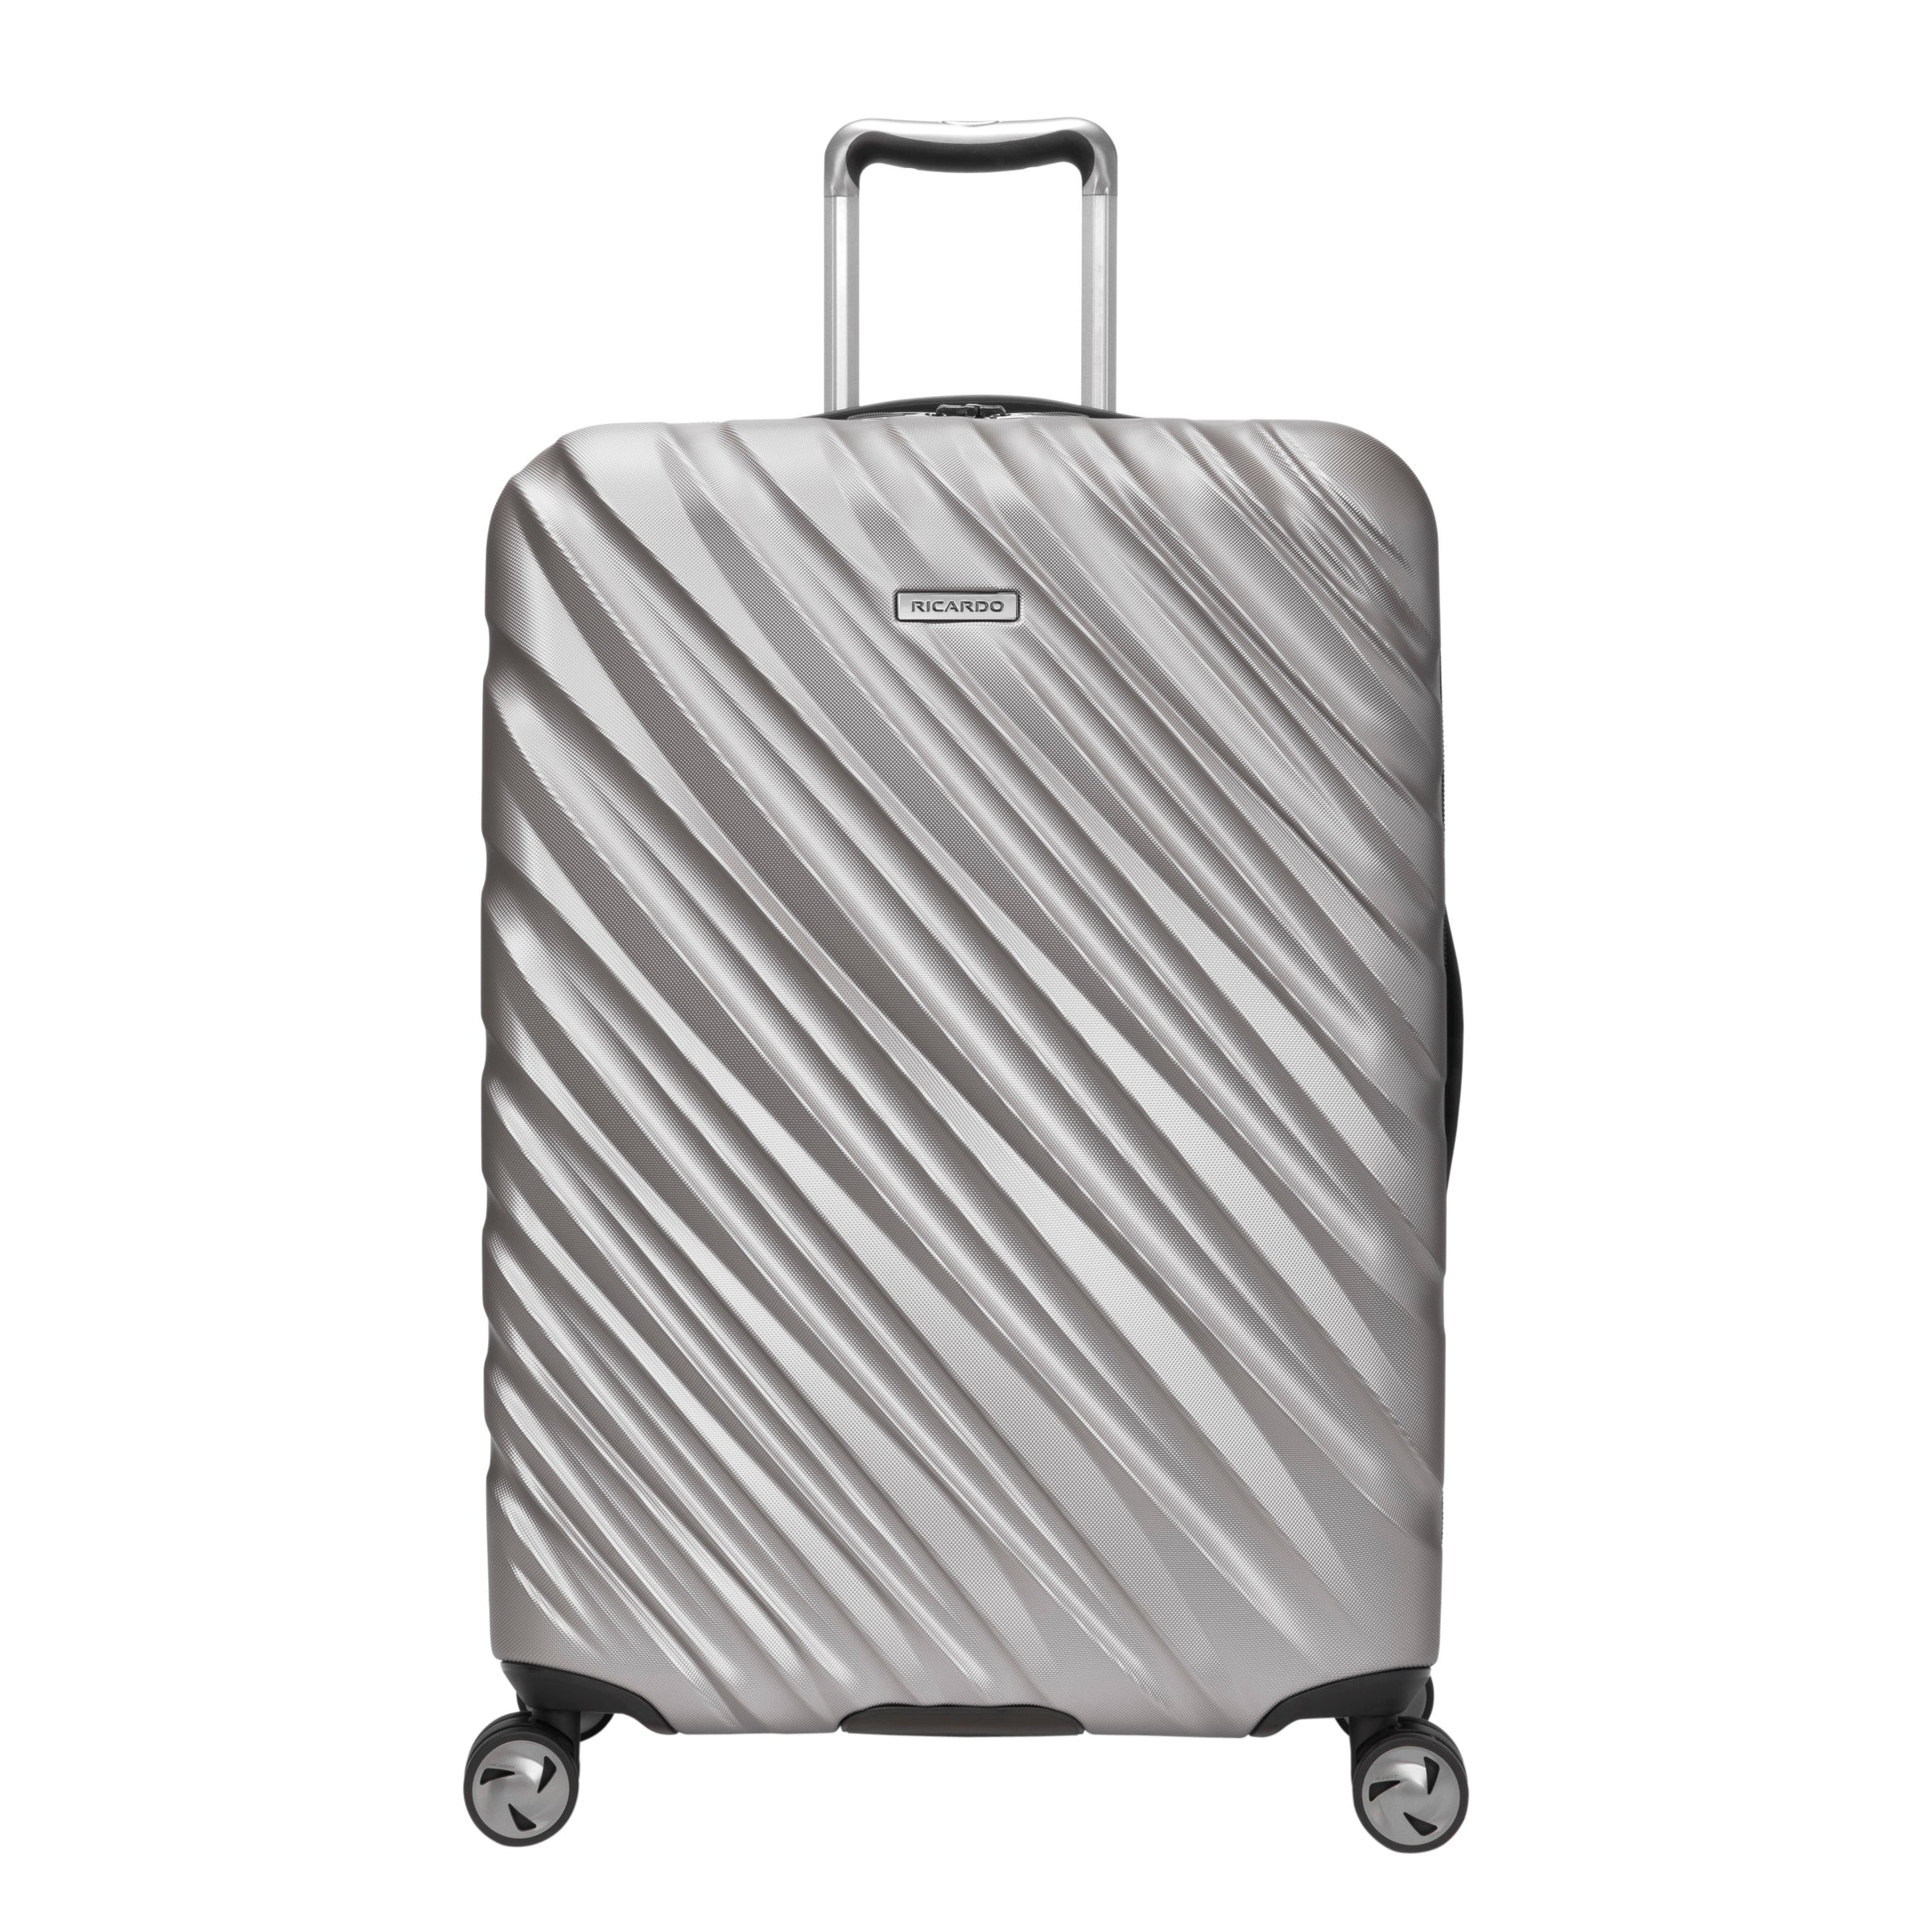 Platinum silver Ricardo Mojave suitcase with black wheels, zipper, and handles